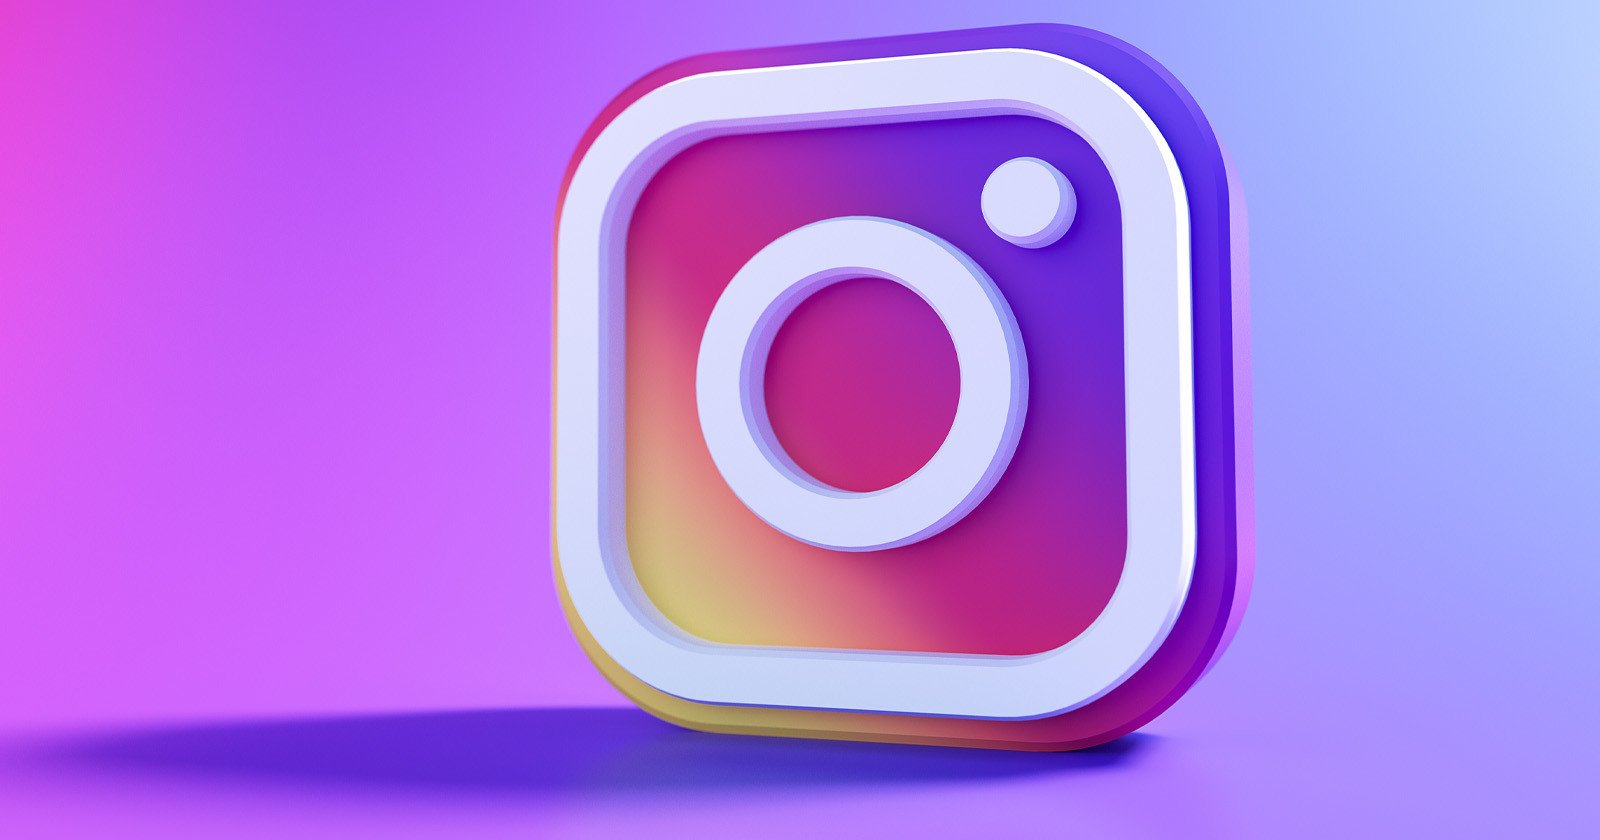  instagram backpedals full-screen feed after user criticism 